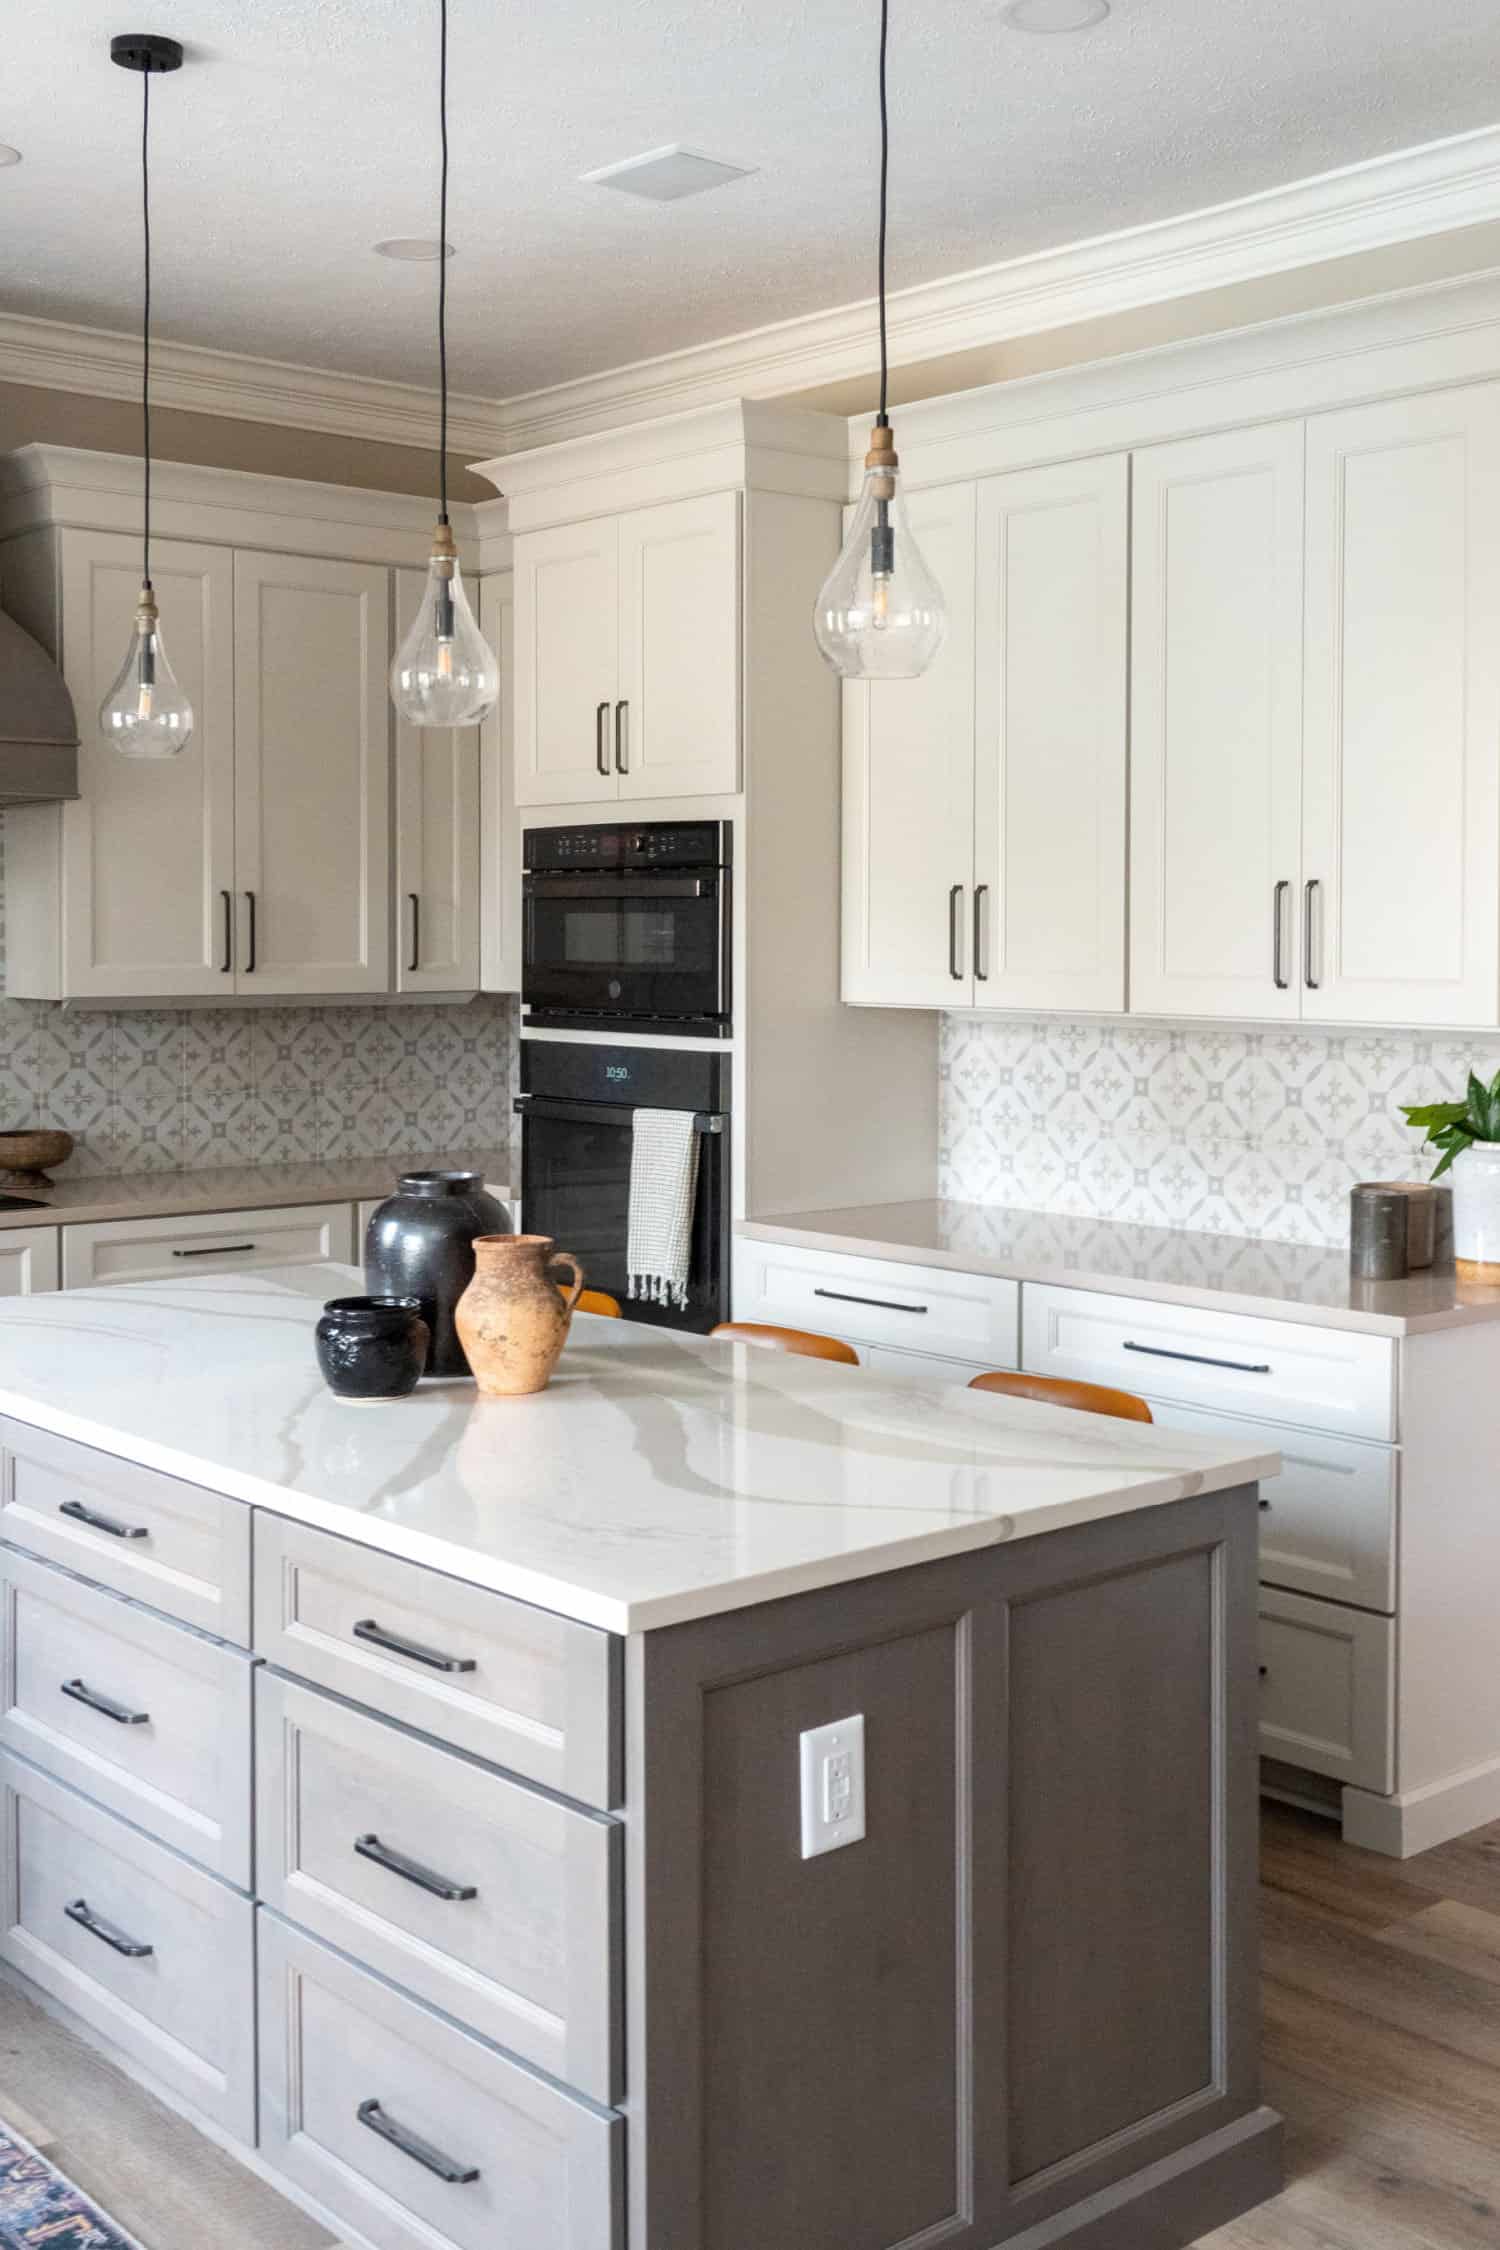 Nicholas Design Build | Remodel a kitchen with white cabinets and gray counter tops.